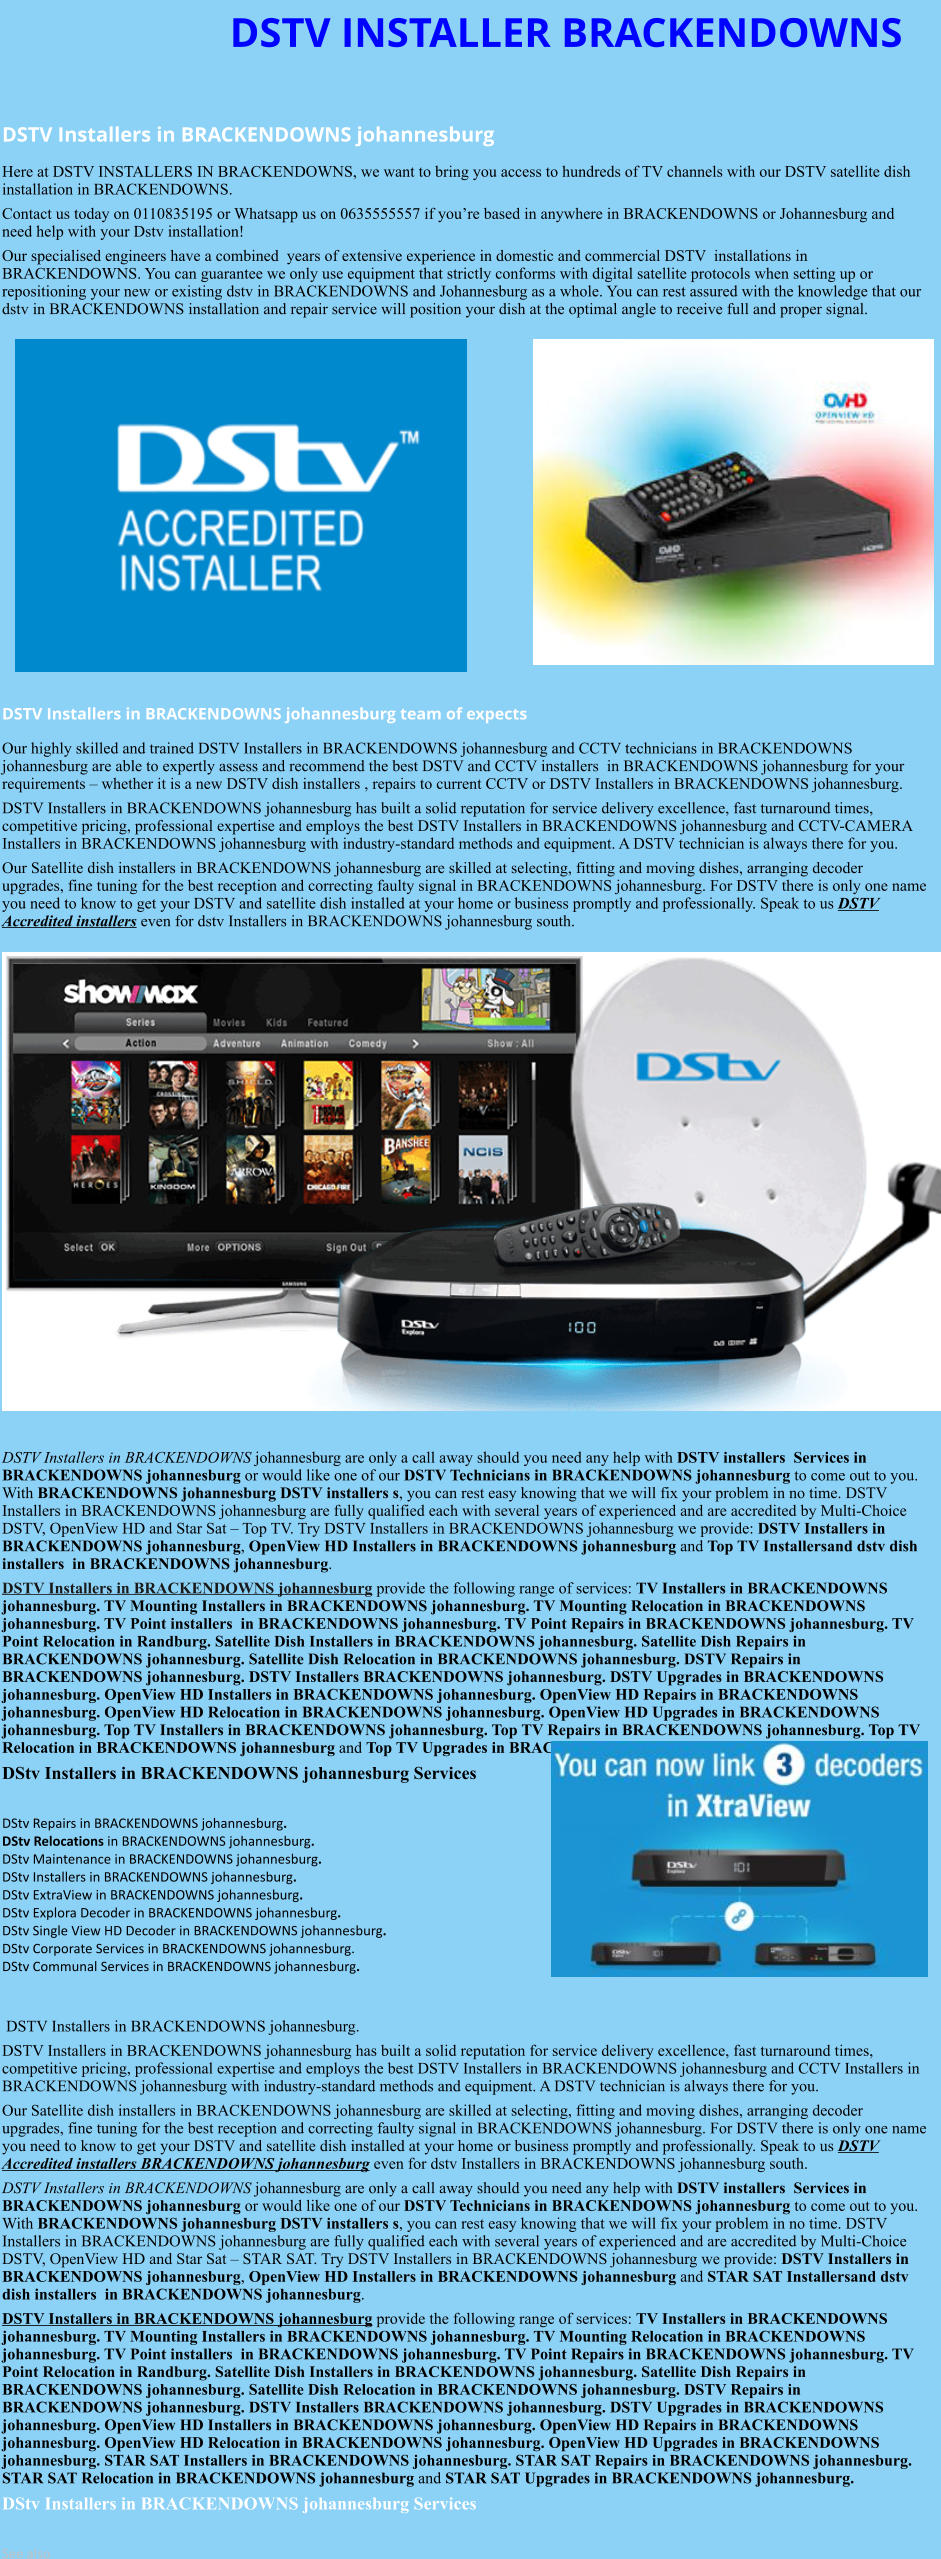 DSTV INSTALLER BRACKENDOWNS  DSTV Installers in BRACKENDOWNS johannesburg  Here at DSTV INSTALLERS IN BRACKENDOWNS, we want to bring you access to hundreds of TV channels with our DSTV satellite dish installation in BRACKENDOWNS. Contact us today on 0110835195 or Whatsapp us on 0635555557 if you’re based in anywhere in BRACKENDOWNS or Johannesburg and need help with your Dstv installation! Our specialised engineers have a combined  years of extensive experience in domestic and commercial DSTV  installations in BRACKENDOWNS. You can guarantee we only use equipment that strictly conforms with digital satellite protocols when setting up or repositioning your new or existing dstv in BRACKENDOWNS and Johannesburg as a whole. You can rest assured with the knowledge that our dstv in BRACKENDOWNS installation and repair service will position your dish at the optimal angle to receive full and proper signal.                DSTV Installers in BRACKENDOWNS johannesburg team of expects Our highly skilled and trained DSTV Installers in BRACKENDOWNS johannesburg and CCTV technicians in BRACKENDOWNS johannesburg are able to expertly assess and recommend the best DSTV and CCTV installers  in BRACKENDOWNS johannesburg for your requirements – whether it is a new DSTV dish installers , repairs to current CCTV or DSTV Installers in BRACKENDOWNS johannesburg. DSTV Installers in BRACKENDOWNS johannesburg has built a solid reputation for service delivery excellence, fast turnaround times, competitive pricing, professional expertise and employs the best DSTV Installers in BRACKENDOWNS johannesburg and CCTV-CAMERA Installers in BRACKENDOWNS johannesburg with industry-standard methods and equipment. A DSTV technician is always there for you. Our Satellite dish installers in BRACKENDOWNS johannesburg are skilled at selecting, fitting and moving dishes, arranging decoder upgrades, fine tuning for the best reception and correcting faulty signal in BRACKENDOWNS johannesburg. For DSTV there is only one name you need to know to get your DSTV and satellite dish installed at your home or business promptly and professionally. Speak to us DSTV Accredited installers even for dstv Installers in BRACKENDOWNS johannesburg south.                      DSTV Installers in BRACKENDOWNS johannesburg are only a call away should you need any help with DSTV installers  Services in BRACKENDOWNS johannesburg or would like one of our DSTV Technicians in BRACKENDOWNS johannesburg to come out to you. With BRACKENDOWNS johannesburg DSTV installers s, you can rest easy knowing that we will fix your problem in no time. DSTV Installers in BRACKENDOWNS johannesburg are fully qualified each with several years of experienced and are accredited by Multi-Choice DSTV, OpenView HD and Star Sat – Top TV. Try DSTV Installers in BRACKENDOWNS johannesburg we provide: DSTV Installers in BRACKENDOWNS johannesburg, OpenView HD Installers in BRACKENDOWNS johannesburg and Top TV Installersand dstv dish installers  in BRACKENDOWNS johannesburg. DSTV Installers in BRACKENDOWNS johannesburg provide the following range of services: TV Installers in BRACKENDOWNS johannesburg. TV Mounting Installers in BRACKENDOWNS johannesburg. TV Mounting Relocation in BRACKENDOWNS johannesburg. TV Point installers  in BRACKENDOWNS johannesburg. TV Point Repairs in BRACKENDOWNS johannesburg. TV Point Relocation in Randburg. Satellite Dish Installers in BRACKENDOWNS johannesburg. Satellite Dish Repairs in BRACKENDOWNS johannesburg. Satellite Dish Relocation in BRACKENDOWNS johannesburg. DSTV Repairs in BRACKENDOWNS johannesburg. DSTV Installers BRACKENDOWNS johannesburg. DSTV Upgrades in BRACKENDOWNS johannesburg. OpenView HD Installers in BRACKENDOWNS johannesburg. OpenView HD Repairs in BRACKENDOWNS johannesburg. OpenView HD Relocation in BRACKENDOWNS johannesburg. OpenView HD Upgrades in BRACKENDOWNS johannesburg. Top TV Installers in BRACKENDOWNS johannesburg. Top TV Repairs in BRACKENDOWNS johannesburg. Top TV Relocation in BRACKENDOWNS johannesburg and Top TV Upgrades in BRACKENDOWNS johannesburg. DStv Installers in BRACKENDOWNS johannesburg Services  DStv Repairs in BRACKENDOWNS johannesburg.  DStv Relocations in BRACKENDOWNS johannesburg.  DStv Maintenance in BRACKENDOWNS johannesburg. DStv Installers in BRACKENDOWNS johannesburg. DStv ExtraView in BRACKENDOWNS johannesburg. DStv Explora Decoder in BRACKENDOWNS johannesburg. DStv Single View HD Decoder in BRACKENDOWNS johannesburg. DStv Corporate Services in BRACKENDOWNS johannesburg. DStv Communal Services in BRACKENDOWNS johannesburg.    DSTV Installers in BRACKENDOWNS johannesburg. DSTV Installers in BRACKENDOWNS johannesburg has built a solid reputation for service delivery excellence, fast turnaround times, competitive pricing, professional expertise and employs the best DSTV Installers in BRACKENDOWNS johannesburg and CCTV Installers in BRACKENDOWNS johannesburg with industry-standard methods and equipment. A DSTV technician is always there for you. Our Satellite dish installers in BRACKENDOWNS johannesburg are skilled at selecting, fitting and moving dishes, arranging decoder upgrades, fine tuning for the best reception and correcting faulty signal in BRACKENDOWNS johannesburg. For DSTV there is only one name you need to know to get your DSTV and satellite dish installed at your home or business promptly and professionally. Speak to us DSTV Accredited installers BRACKENDOWNS johannesburg even for dstv Installers in BRACKENDOWNS johannesburg south. DSTV Installers in BRACKENDOWNS johannesburg are only a call away should you need any help with DSTV installers  Services in BRACKENDOWNS johannesburg or would like one of our DSTV Technicians in BRACKENDOWNS johannesburg to come out to you. With BRACKENDOWNS johannesburg DSTV installers s, you can rest easy knowing that we will fix your problem in no time. DSTV Installers in BRACKENDOWNS johannesburg are fully qualified each with several years of experienced and are accredited by Multi-Choice DSTV, OpenView HD and Star Sat – STAR SAT. Try DSTV Installers in BRACKENDOWNS johannesburg we provide: DSTV Installers in BRACKENDOWNS johannesburg, OpenView HD Installers in BRACKENDOWNS johannesburg and STAR SAT Installersand dstv dish installers  in BRACKENDOWNS johannesburg. DSTV Installers in BRACKENDOWNS johannesburg provide the following range of services: TV Installers in BRACKENDOWNS johannesburg. TV Mounting Installers in BRACKENDOWNS johannesburg. TV Mounting Relocation in BRACKENDOWNS johannesburg. TV Point installers  in BRACKENDOWNS johannesburg. TV Point Repairs in BRACKENDOWNS johannesburg. TV Point Relocation in Randburg. Satellite Dish Installers in BRACKENDOWNS johannesburg. Satellite Dish Repairs in BRACKENDOWNS johannesburg. Satellite Dish Relocation in BRACKENDOWNS johannesburg. DSTV Repairs in BRACKENDOWNS johannesburg. DSTV Installers BRACKENDOWNS johannesburg. DSTV Upgrades in BRACKENDOWNS johannesburg. OpenView HD Installers in BRACKENDOWNS johannesburg. OpenView HD Repairs in BRACKENDOWNS johannesburg. OpenView HD Relocation in BRACKENDOWNS johannesburg. OpenView HD Upgrades in BRACKENDOWNS johannesburg. STAR SAT Installers in BRACKENDOWNS johannesburg. STAR SAT Repairs in BRACKENDOWNS johannesburg. STAR SAT Relocation in BRACKENDOWNS johannesburg and STAR SAT Upgrades in BRACKENDOWNS johannesburg. DStv Installers in BRACKENDOWNS johannesburg Services  See also